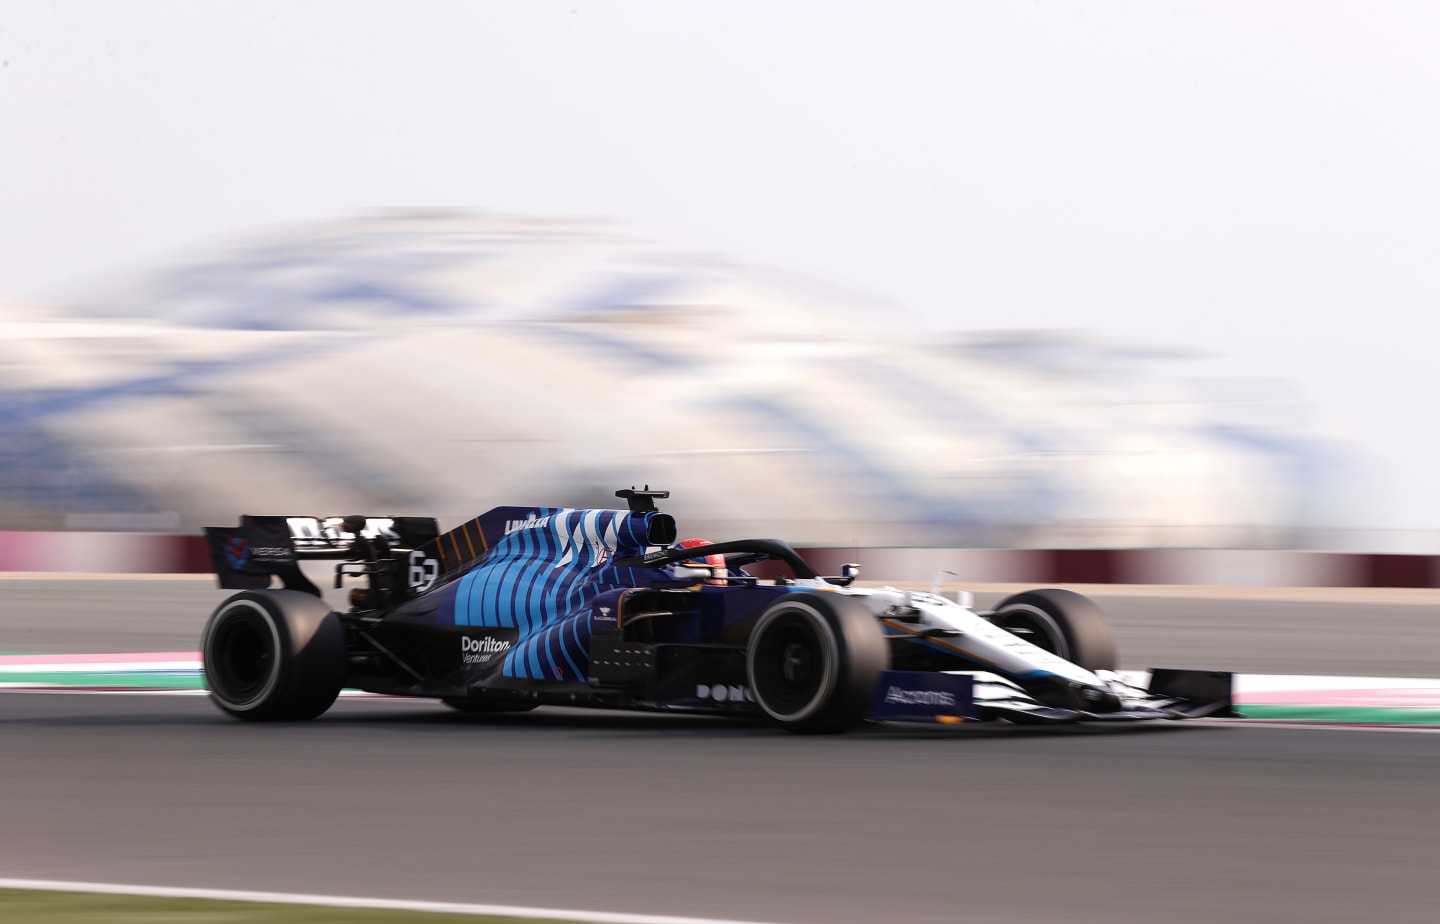 DOHA, QATAR - NOVEMBER 19: George Russell of Great Britain driving the (63) Williams Racing FW43B Mercedes during practice ahead of the F1 Grand Prix of Qatar at Losail International Circuit on November 19, 2021 in Doha, Qatar. (Photo by Lars Baron/Getty Images)